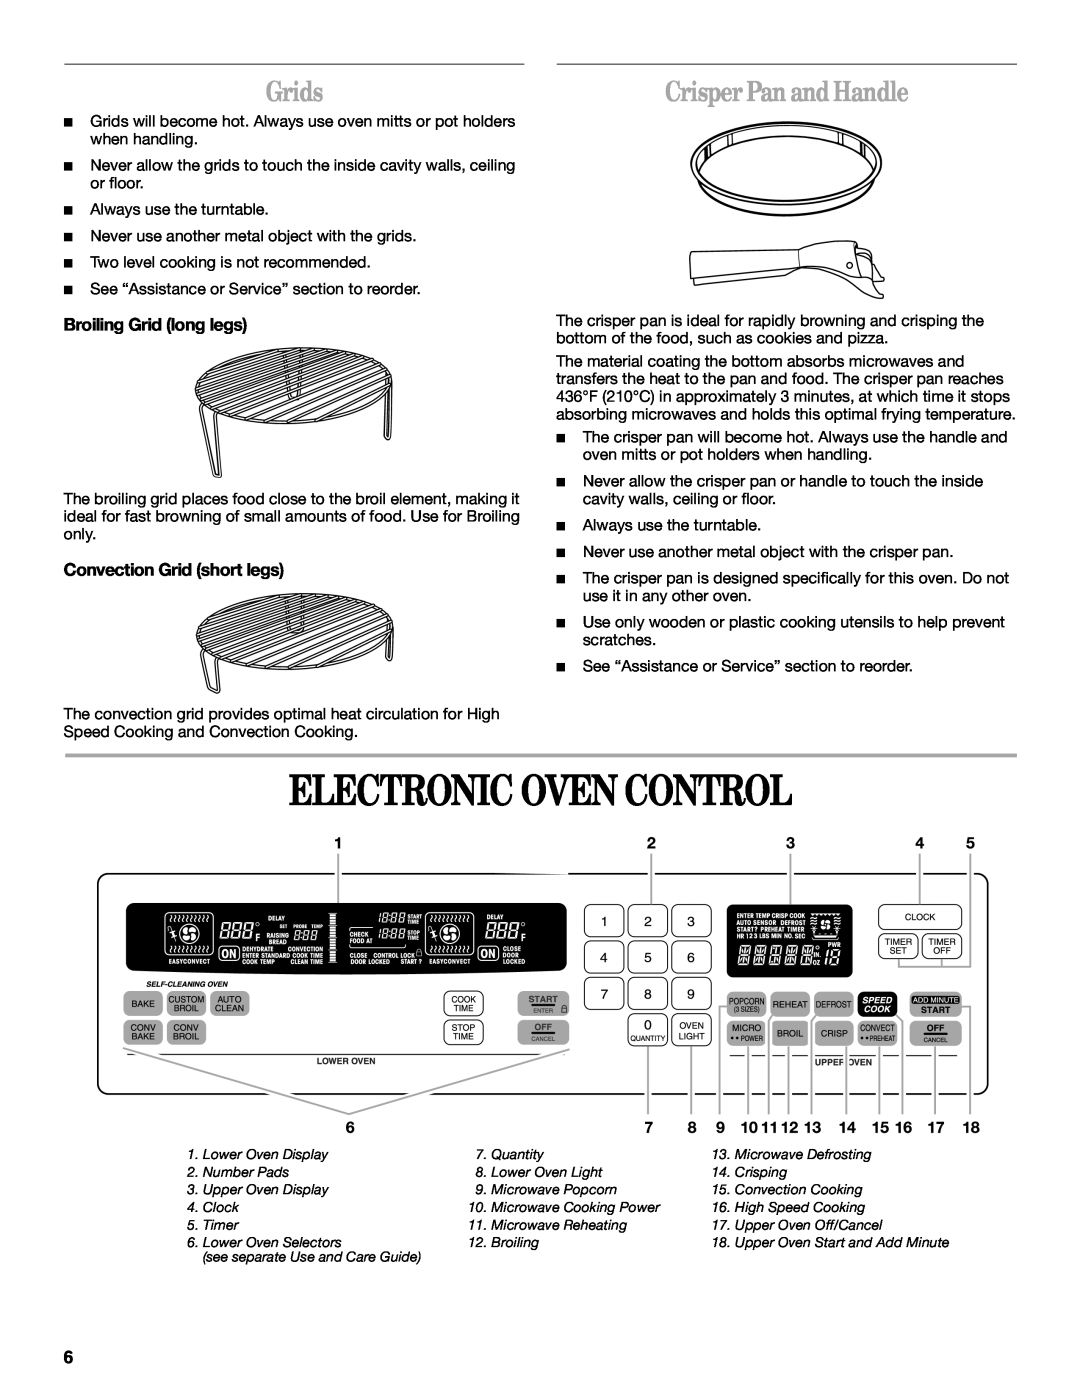 Whirlpool YGSC308, YGSC278 manual Electronic Oven Control, Grids, Crisper Pan andHandle 